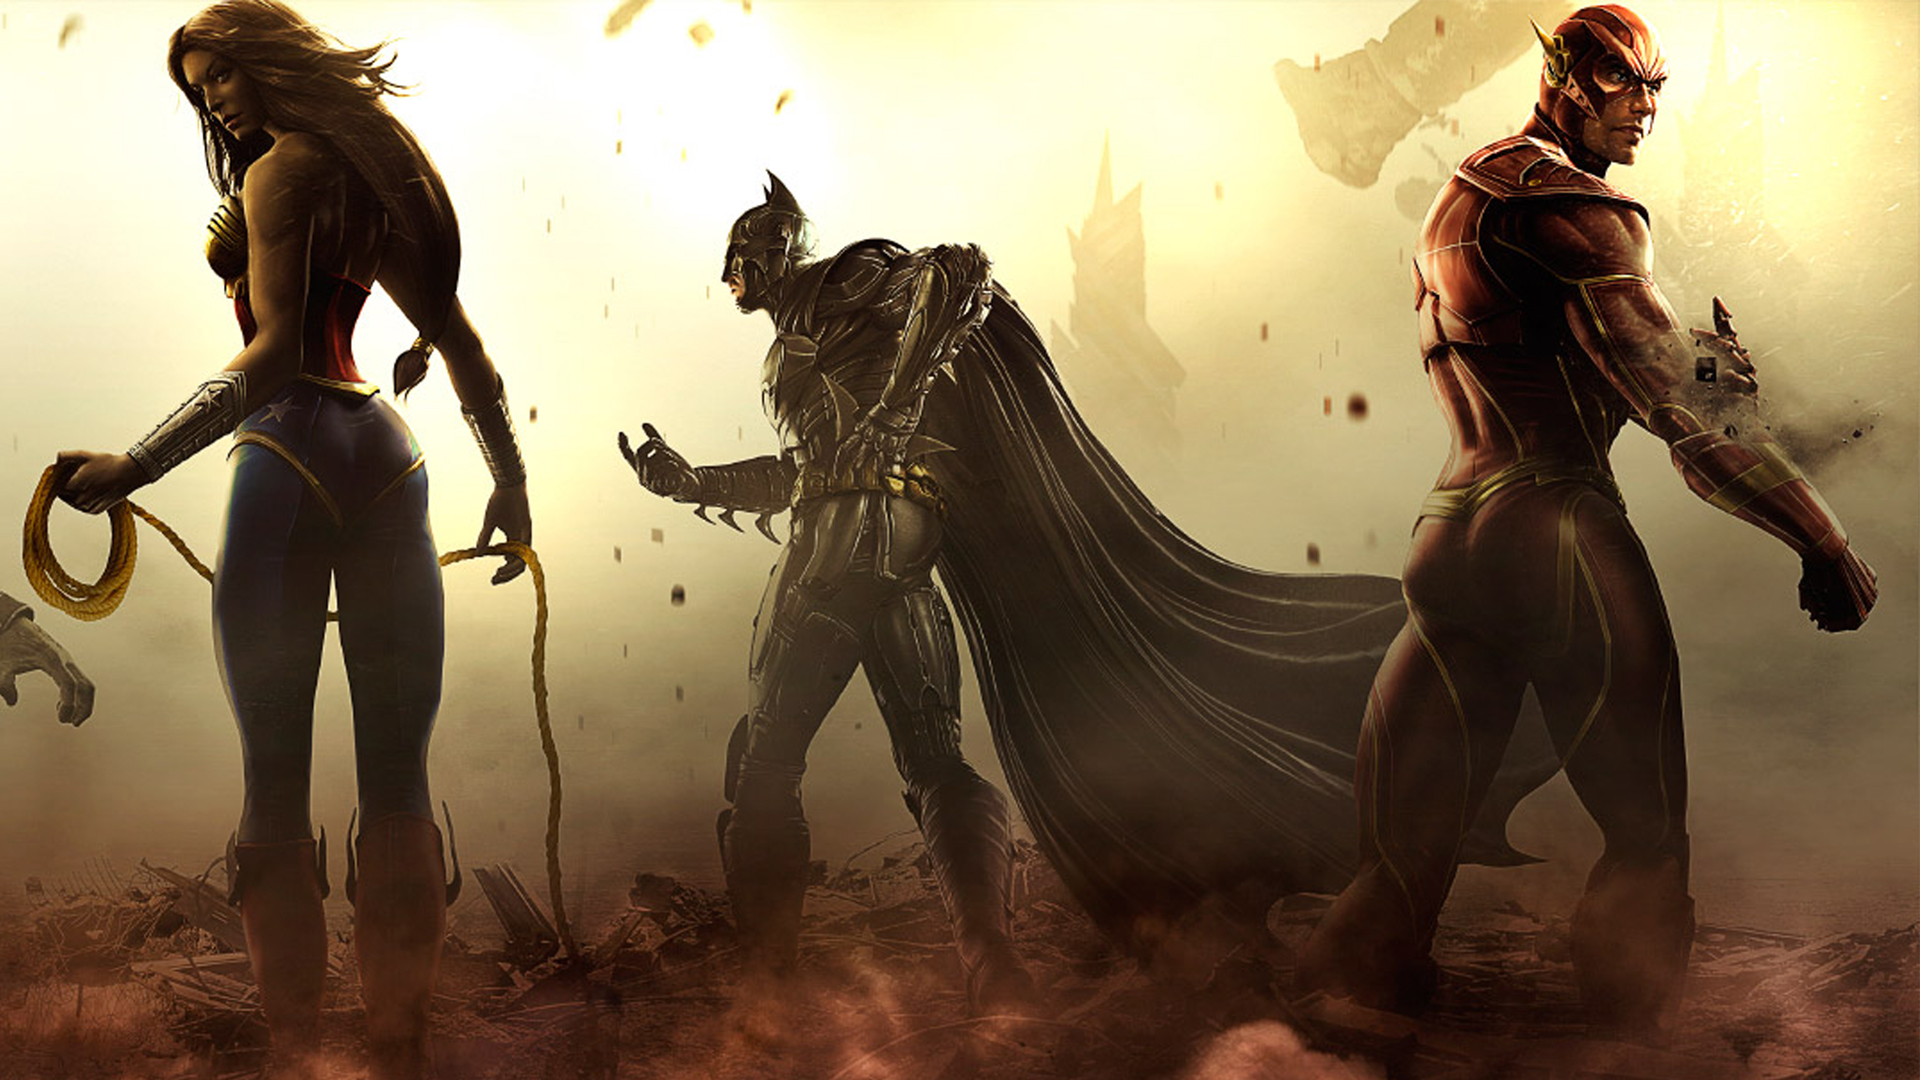  Gods Among Us You are downloading Injustice Gods Among Us wallpaper 9